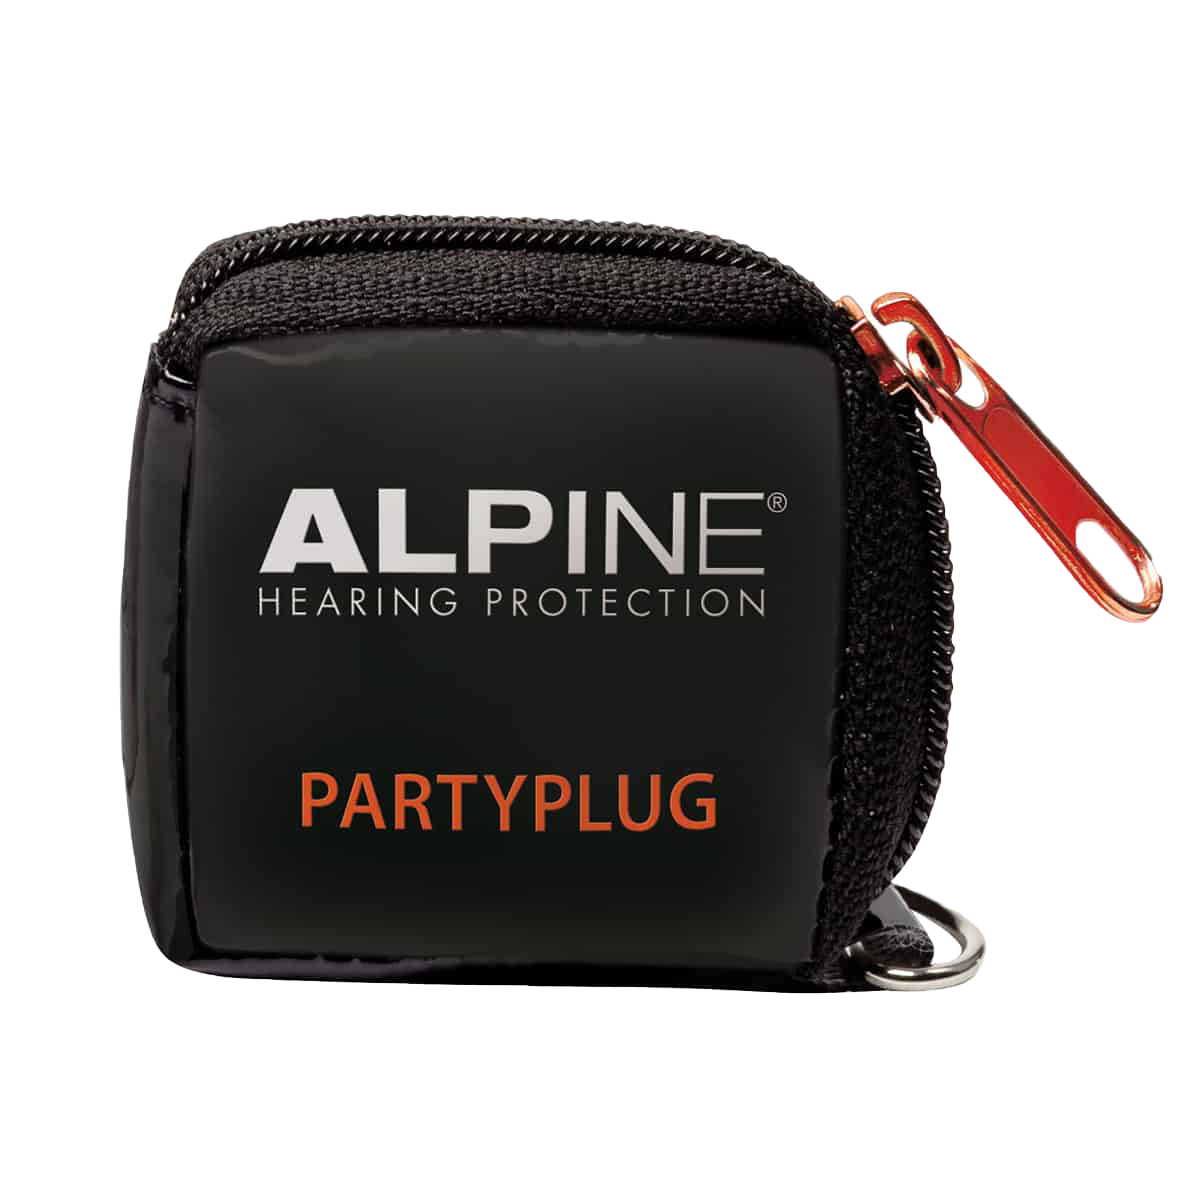 Alpine travelcase for travelling Alpine hearing protection Earplugs earmuffs protect your ear red dot award fly travel noise protect holiday flyfit red dot award pressure on the eardrums Pressure-regulating filter FlyFit Pluggies Kids Plug&Go Keychain 